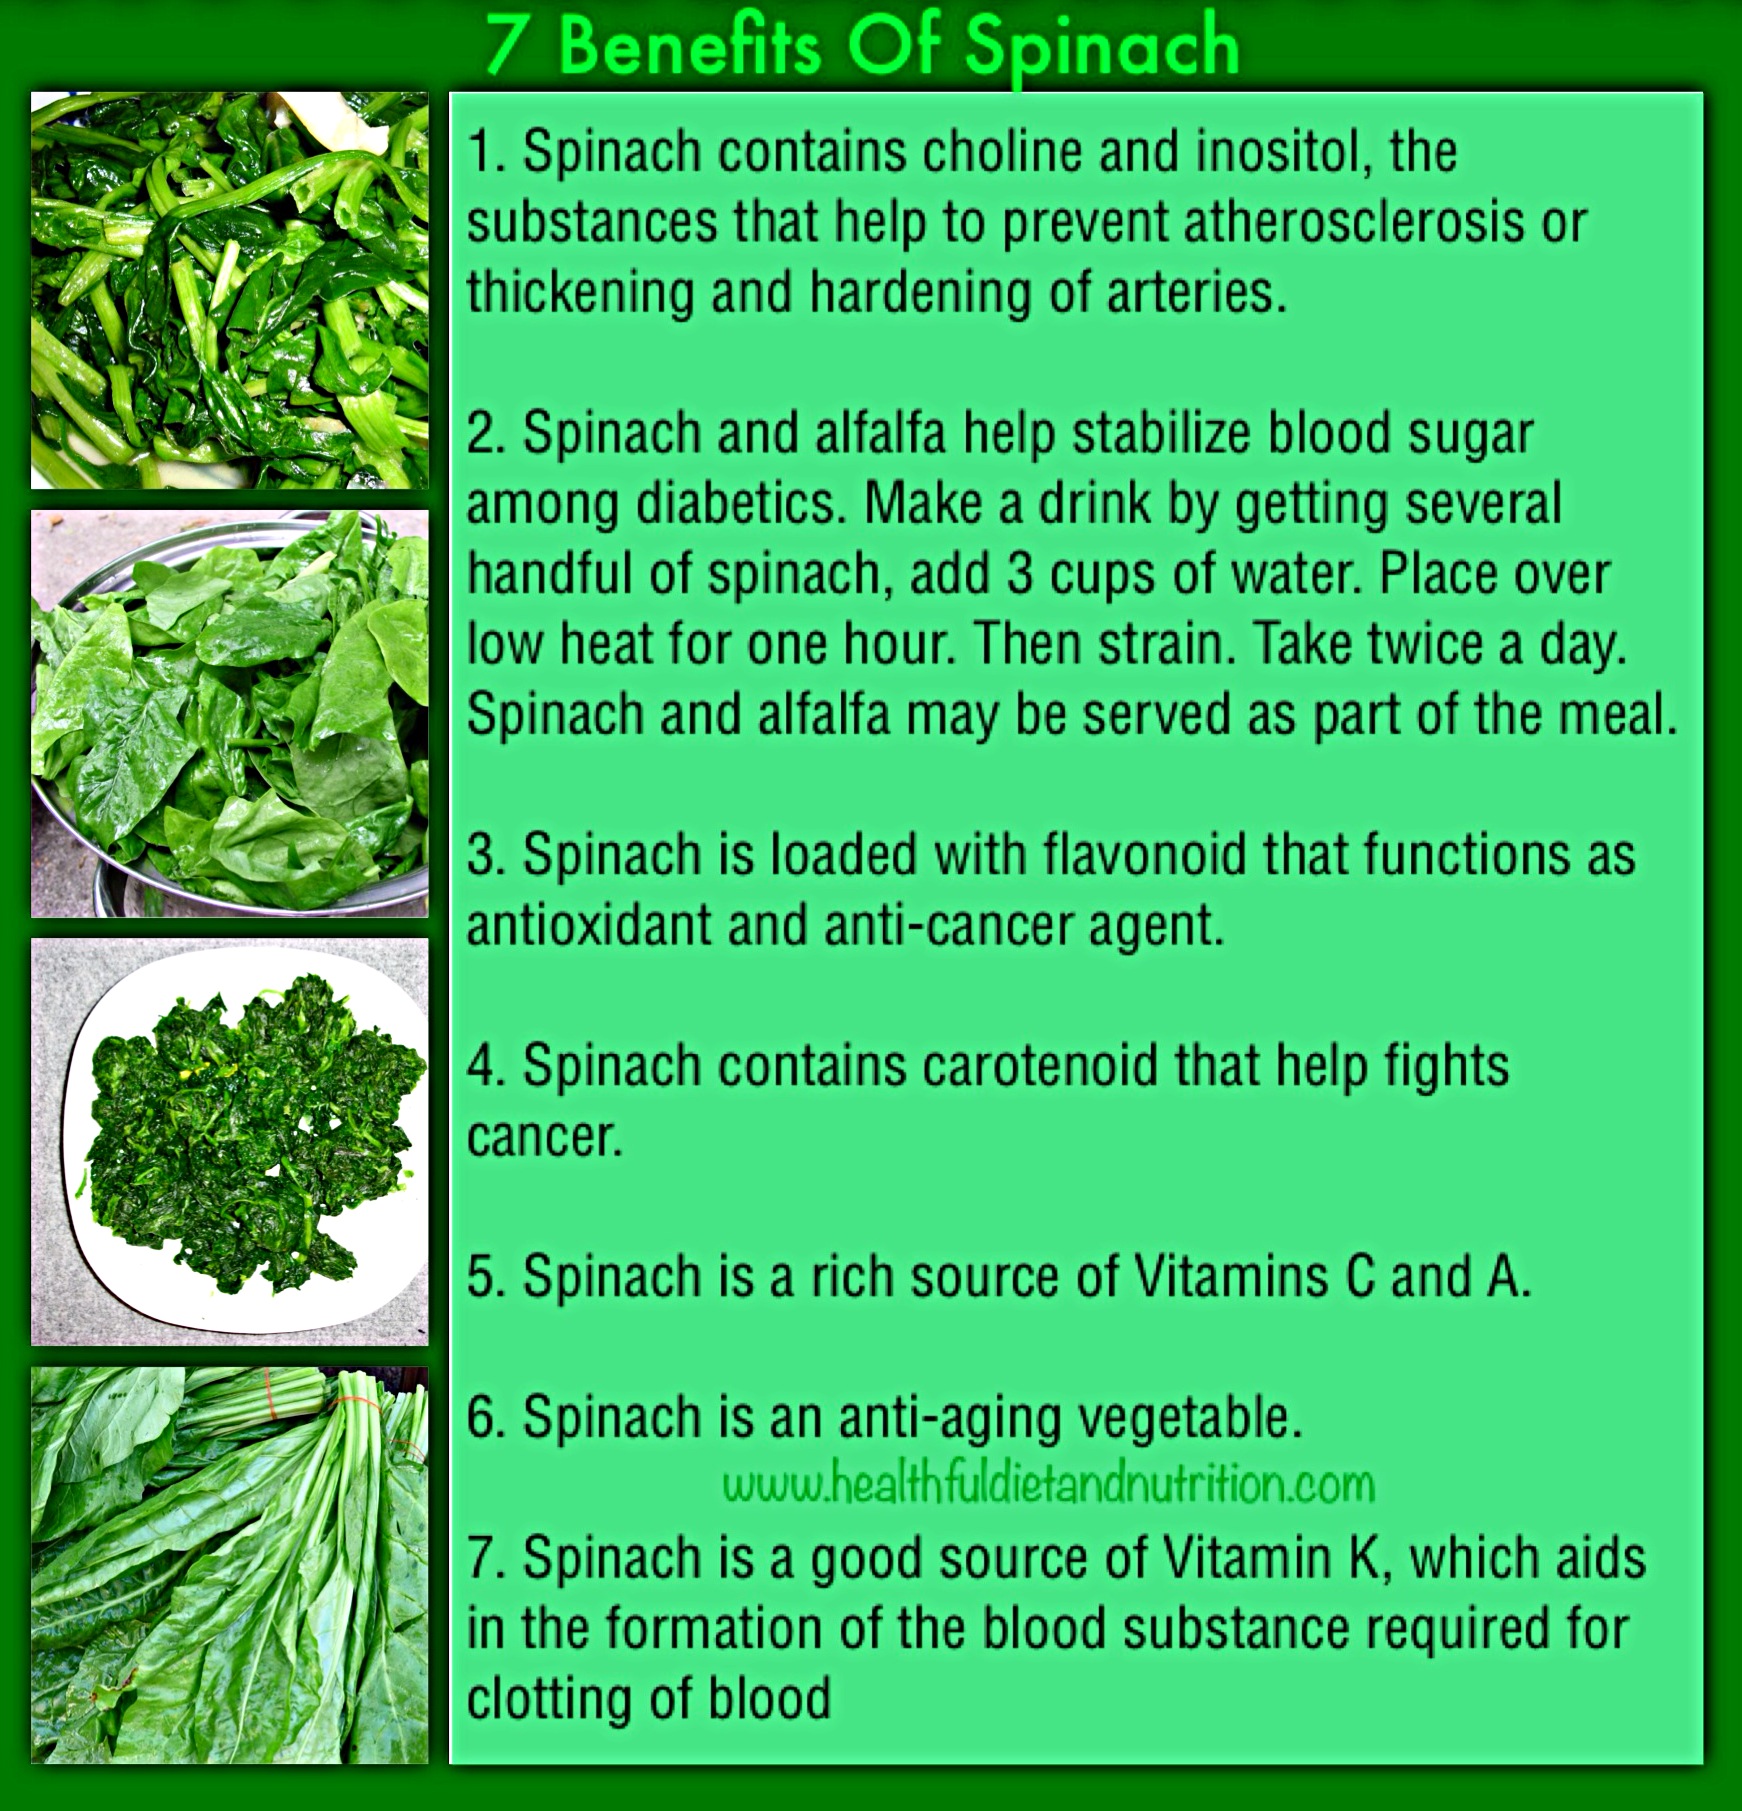 7 Benefits Of Spinach